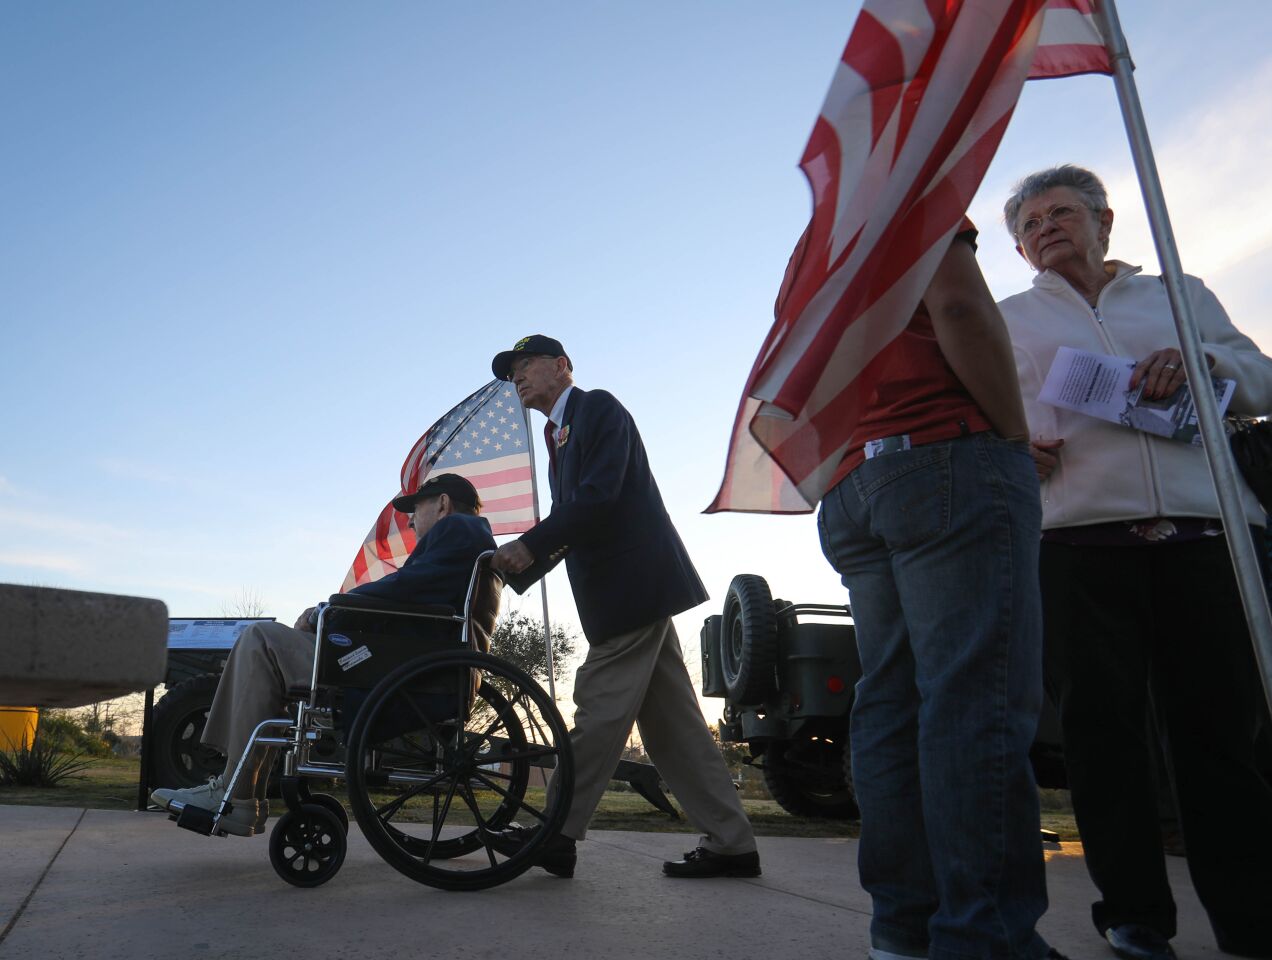 World War II Navy veteran of the Battle of Iwo Jima, Mort Block, of Carlsbad, is pushed by Marine Corps Vietnam veteran Nick Pereira, also from Carlsbad, during the commemoration ceremony for the 75th anniversary of the battle, at Camp Pendleton, February 15. This is the last time the Iwo Jima Commemorative Committee is planning to hold a formal West Coast gathering of veterans of the battle.